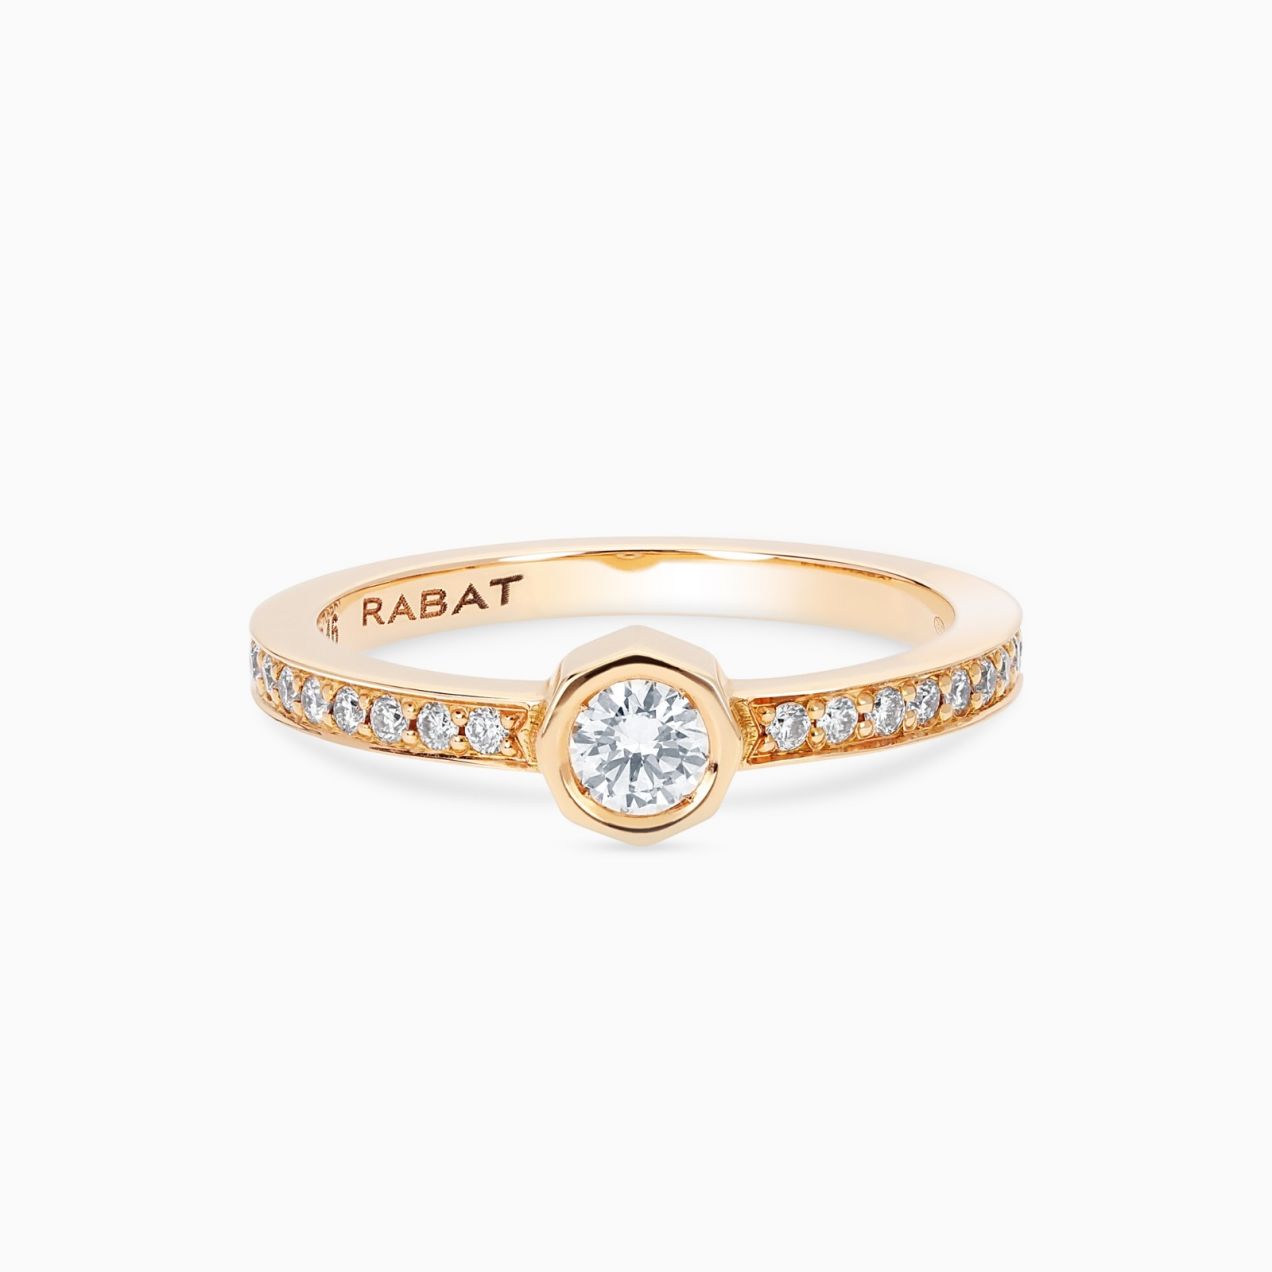 Solitaire ring in rose gold with a central diamond and diamond arm